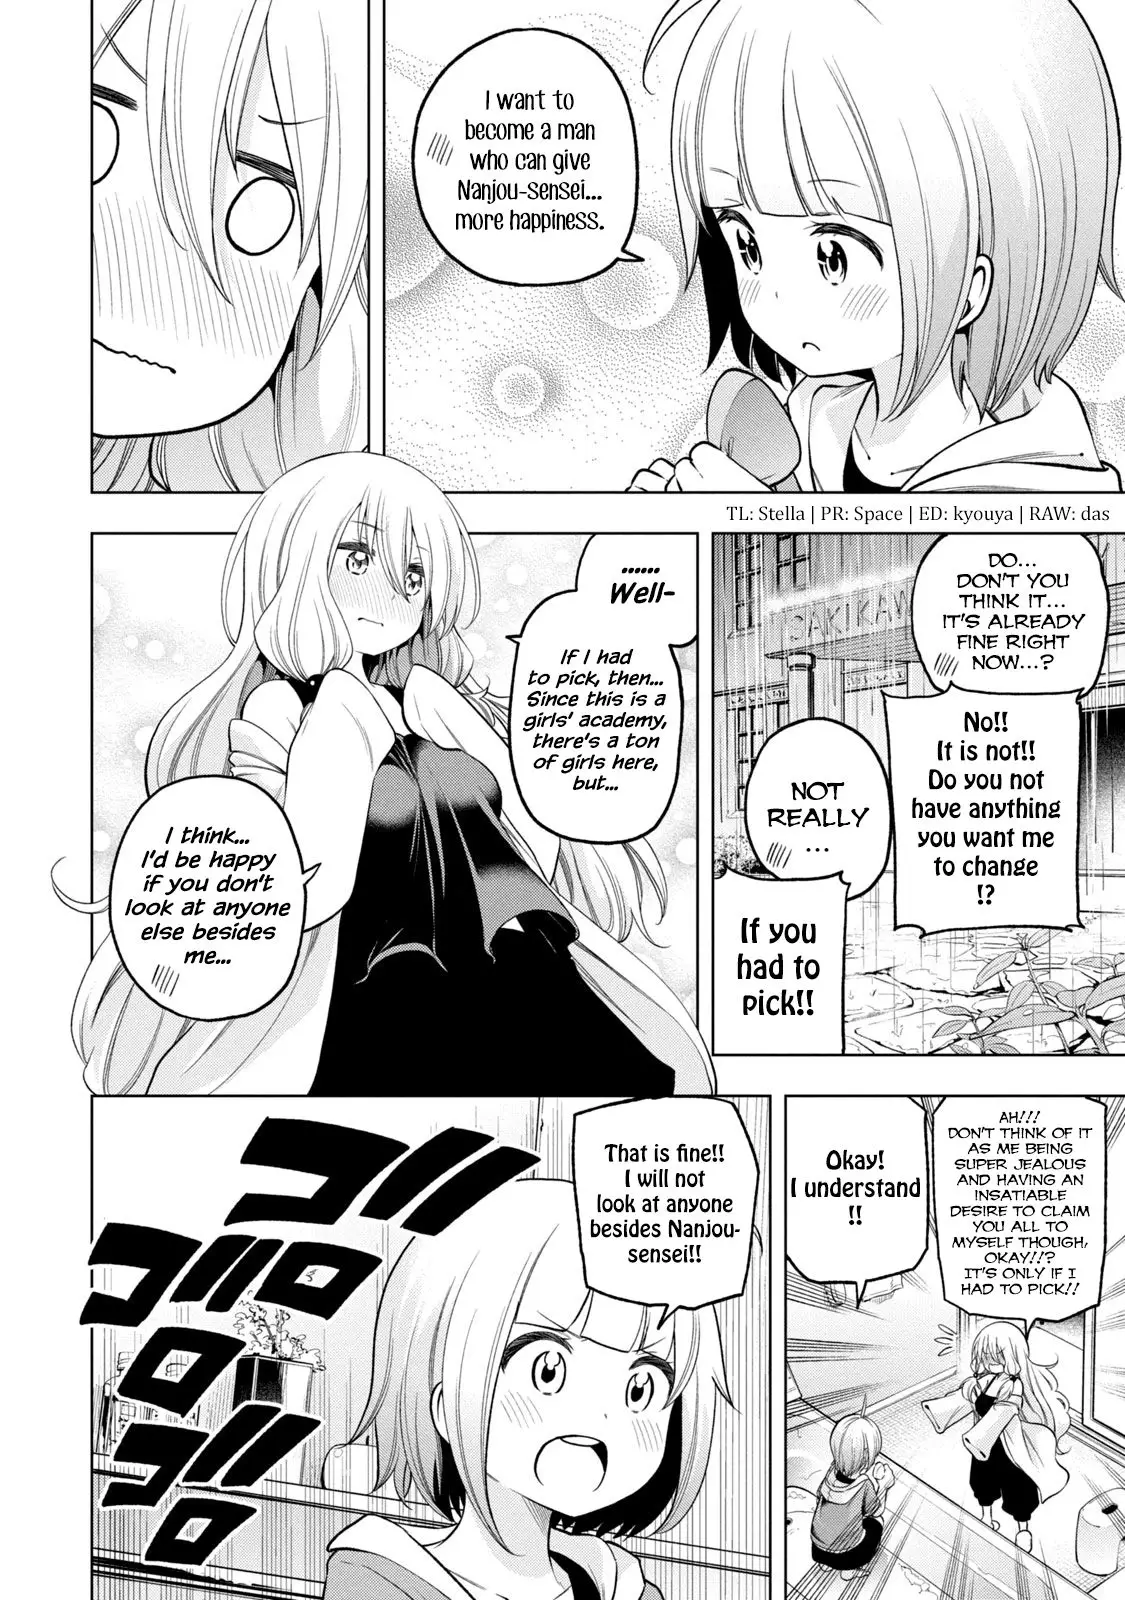 Why are you here Sensei!? - 84 page 4